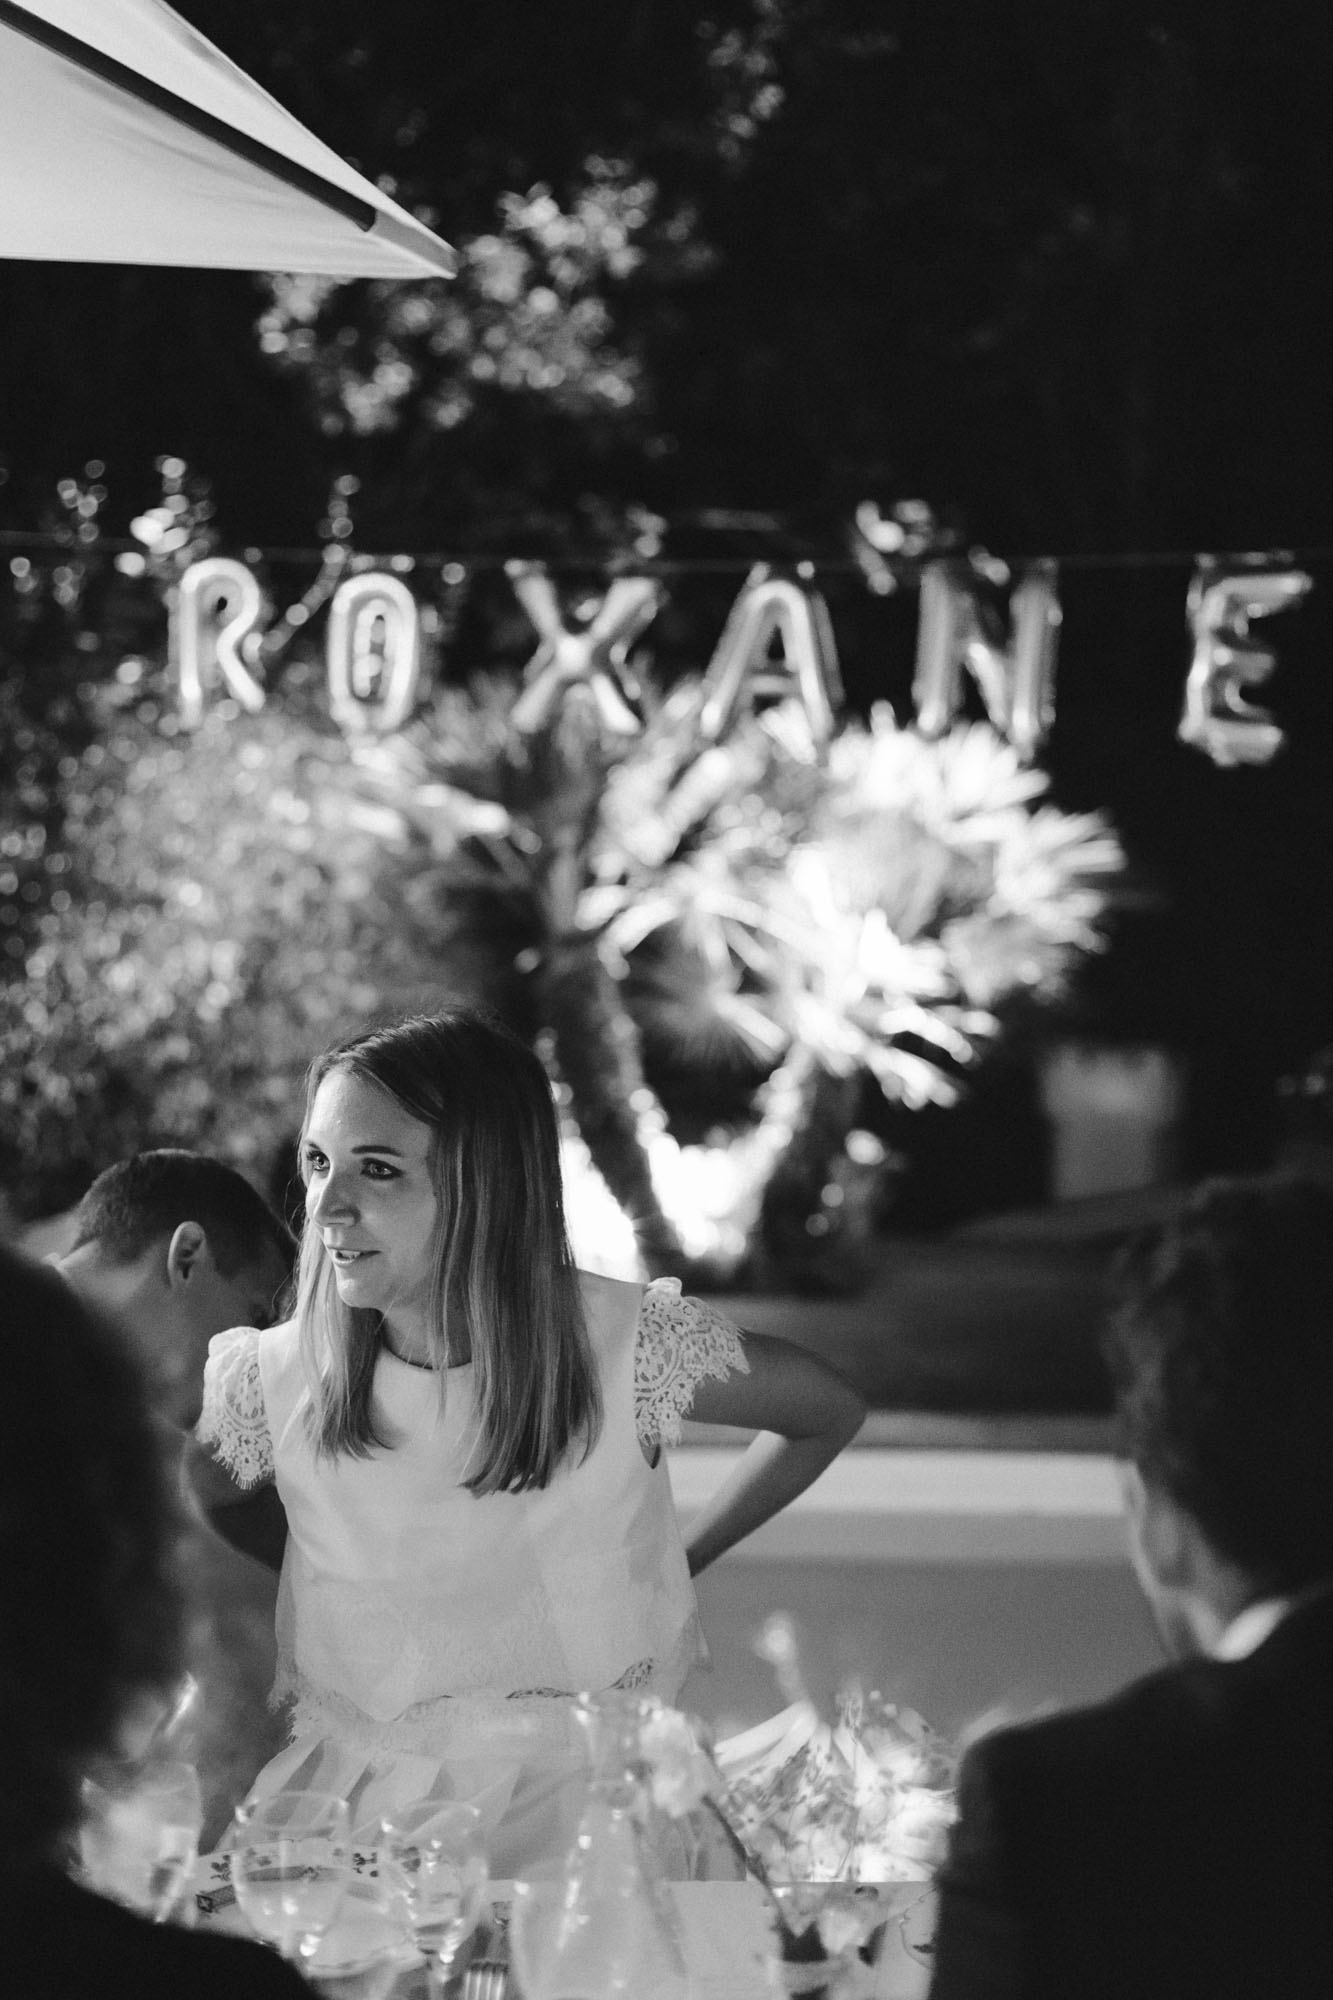 Bordeaux wedding photographer: the bride sits at the dinner table, in the background her name is written in golden letter balloons over the swimming pool of this Arcachon home